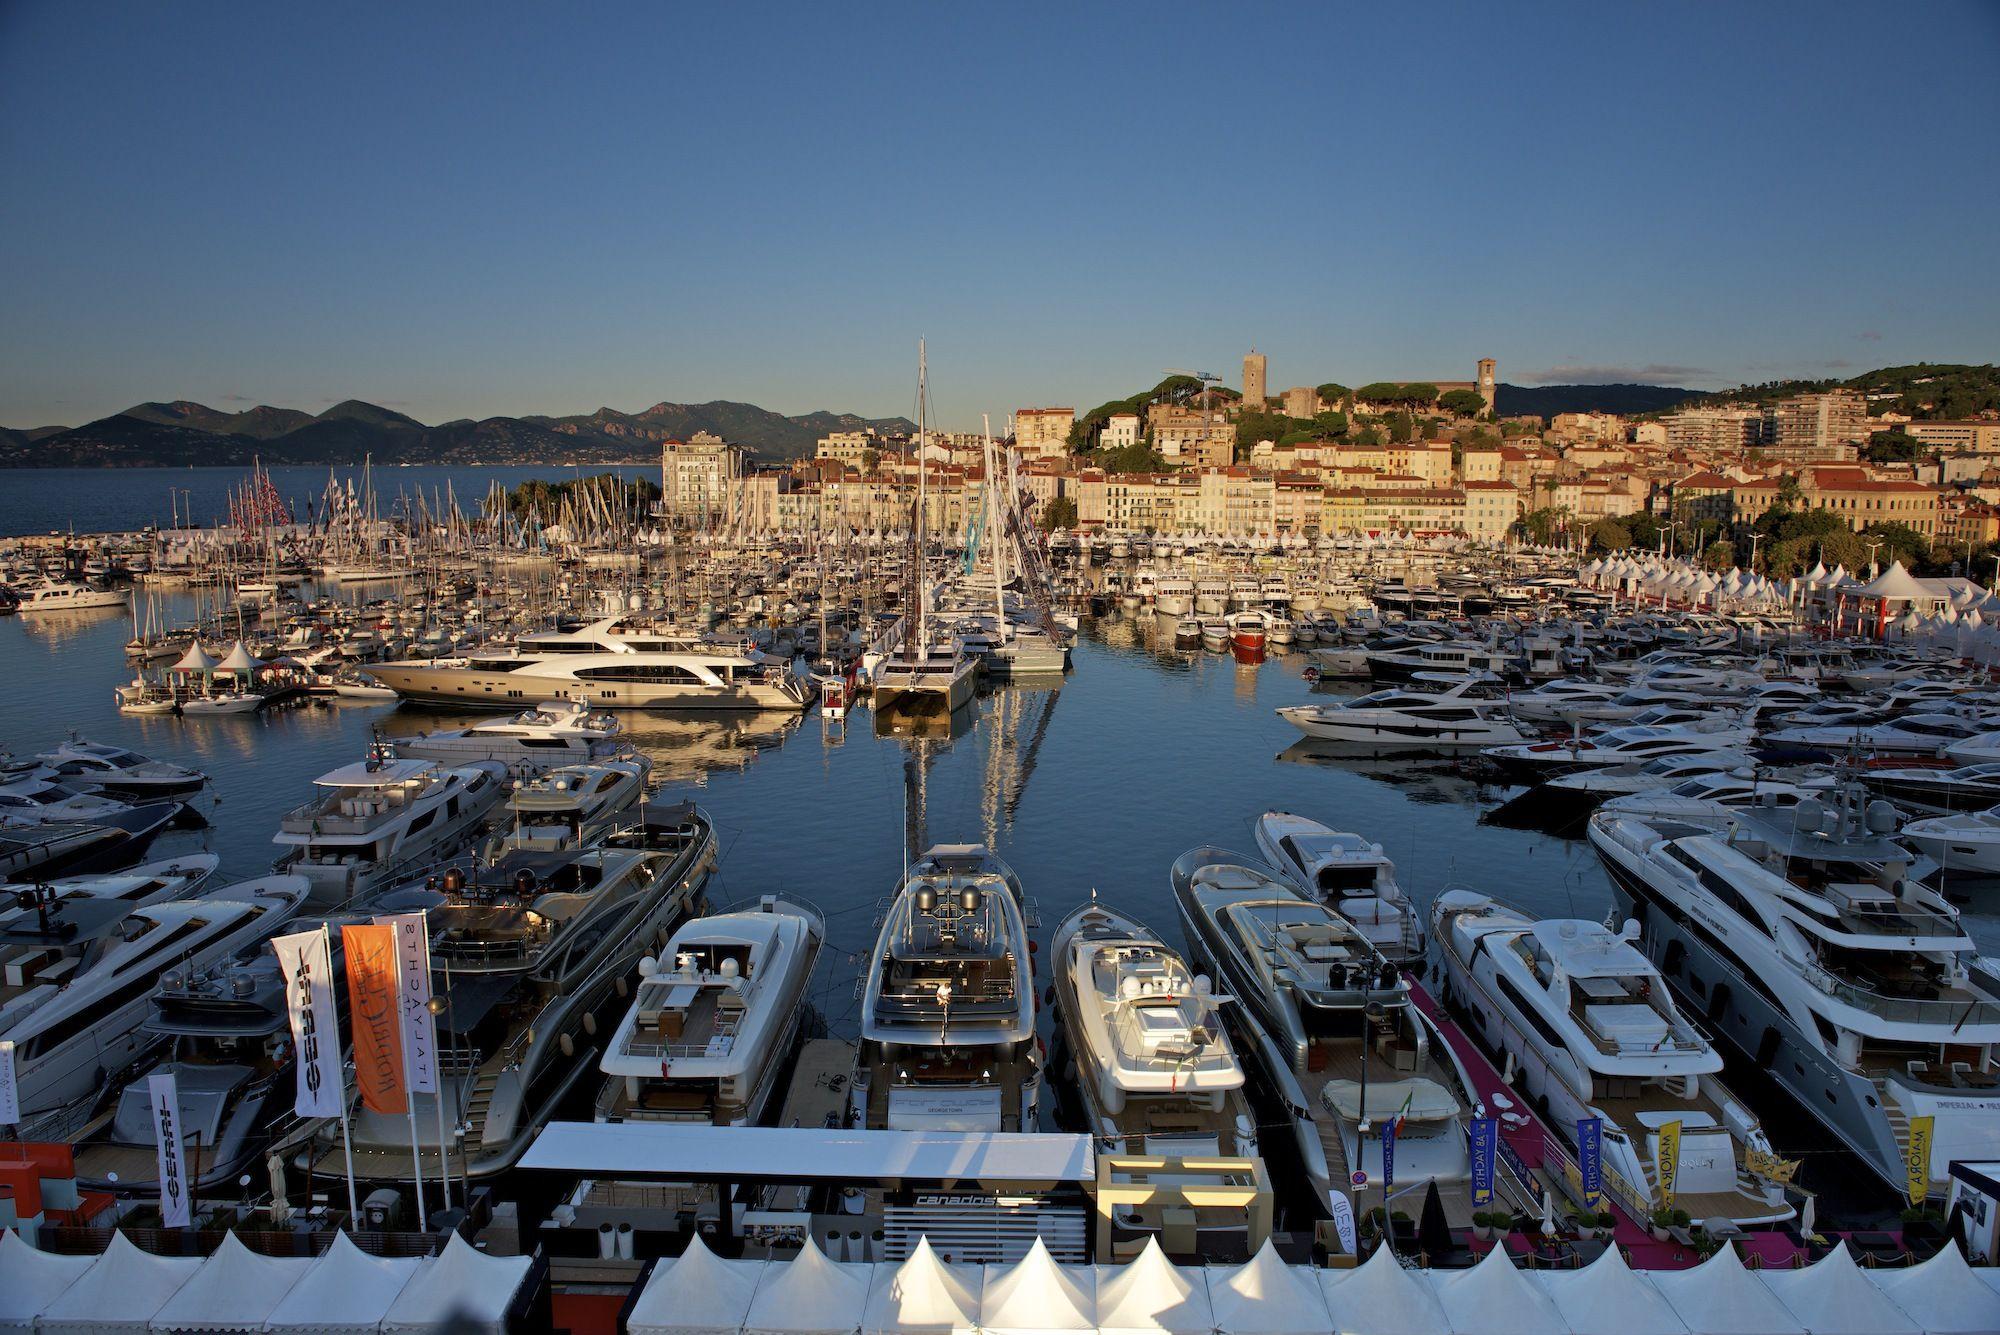 Boats in the port of Cannes, France wallpaper and image